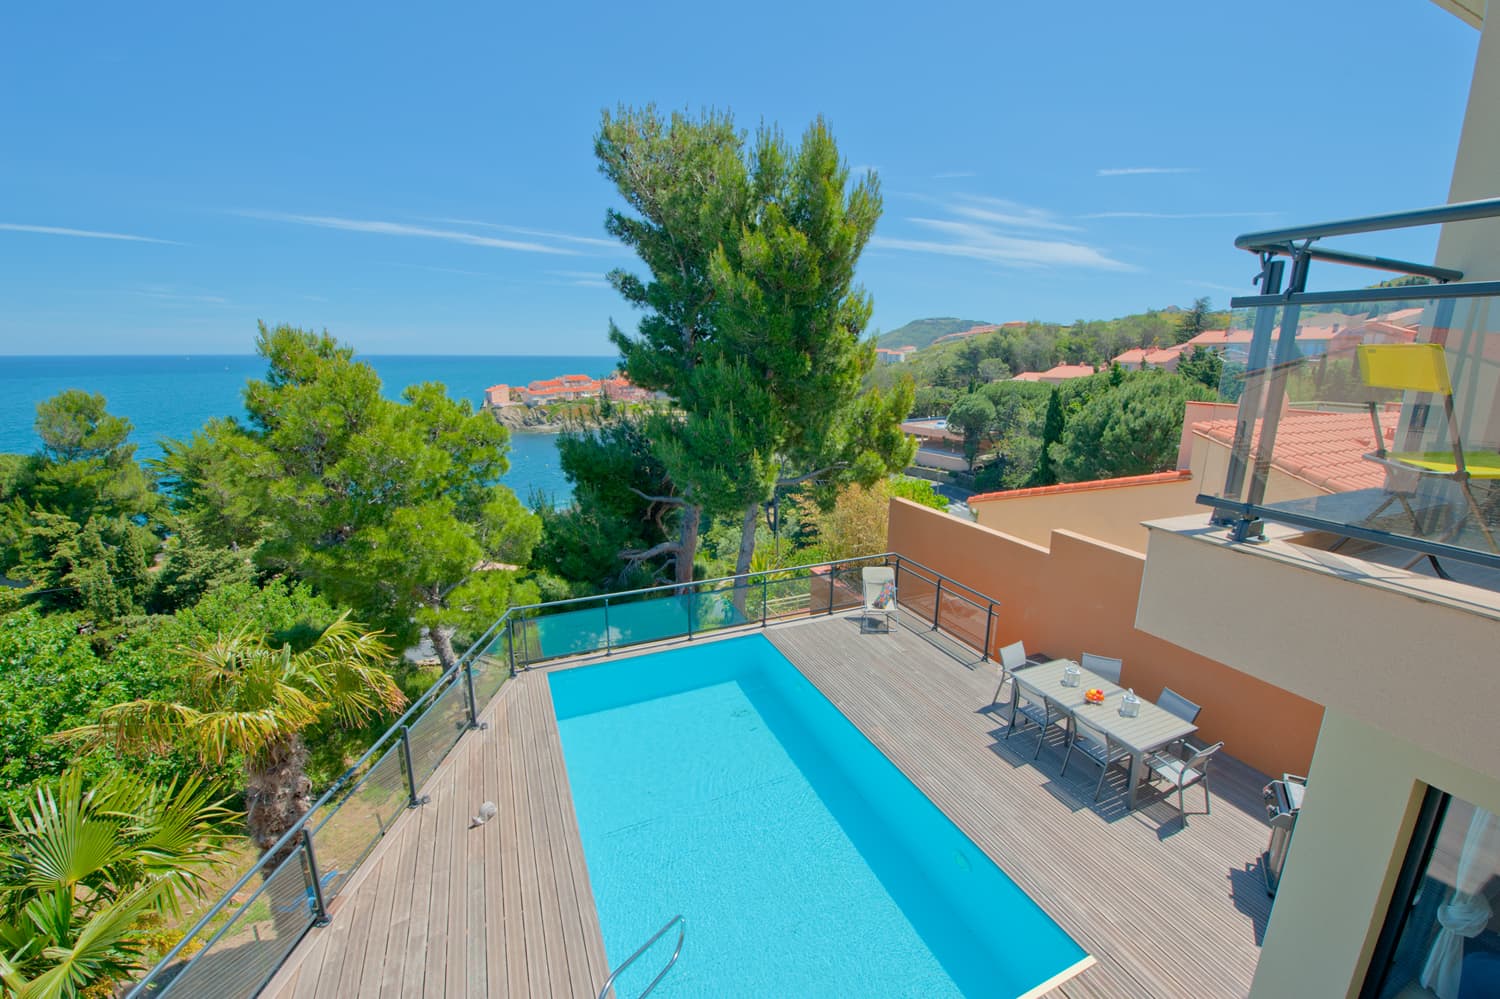 Holiday villa with sea views and private swimming pool in the South of France | Villa Impériale